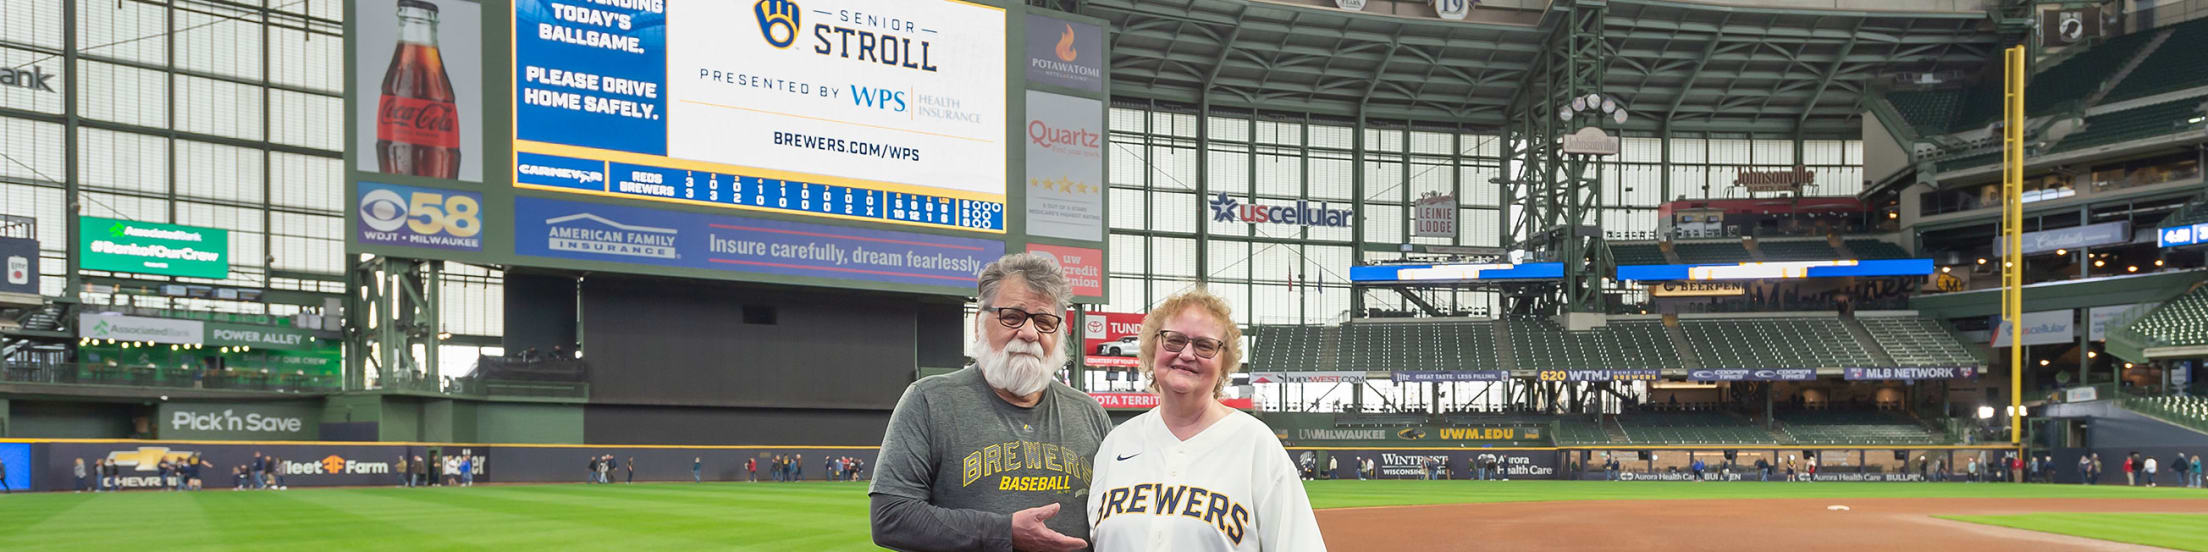 WPS teams up with Milwaukee Brewers to offer senior stroll, senior ticket  discount